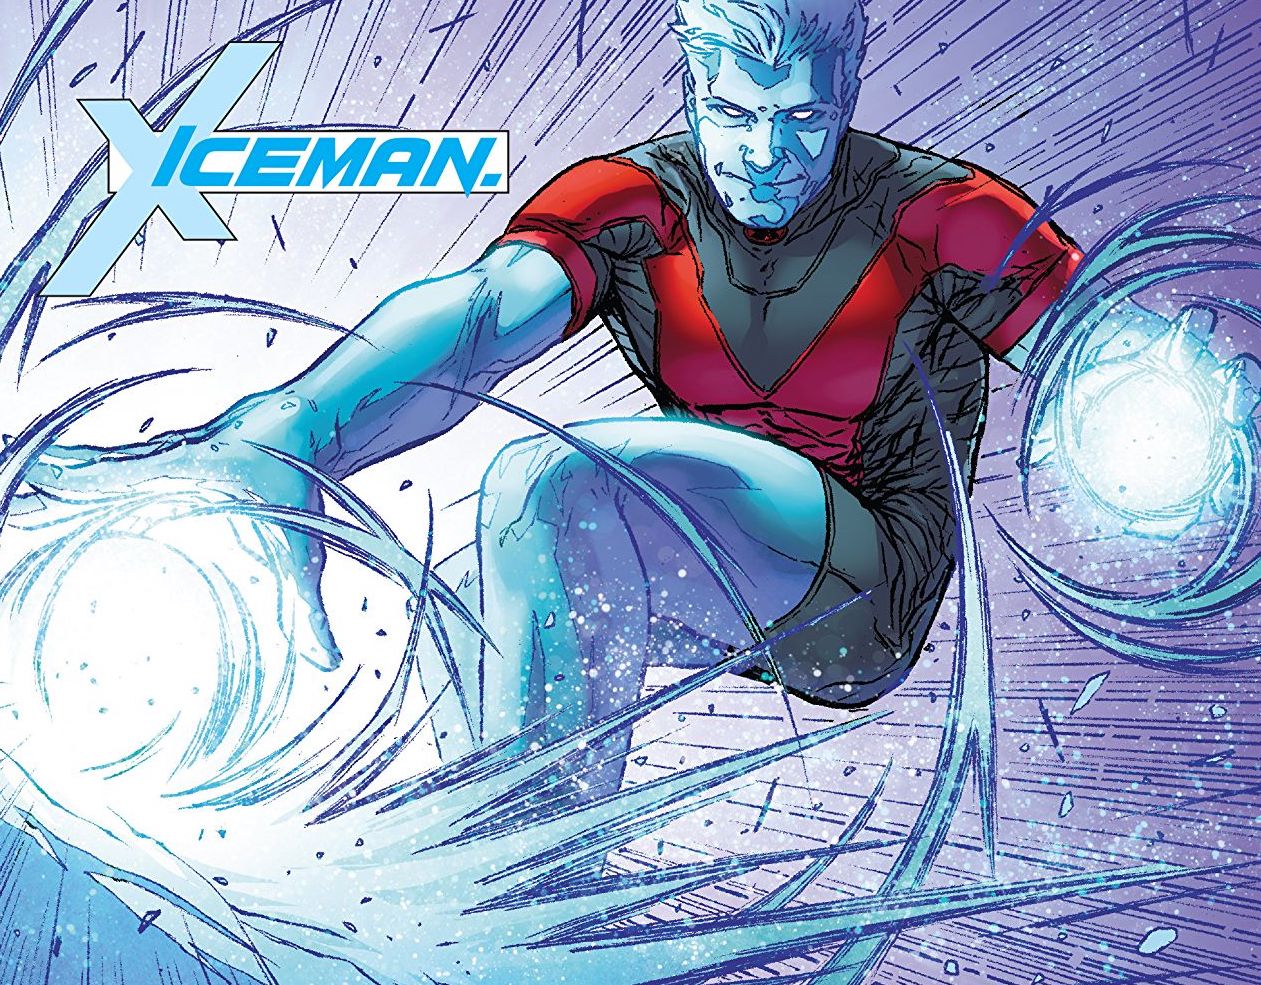 A Look Back at Sina Grace’s run on Iceman.﻿